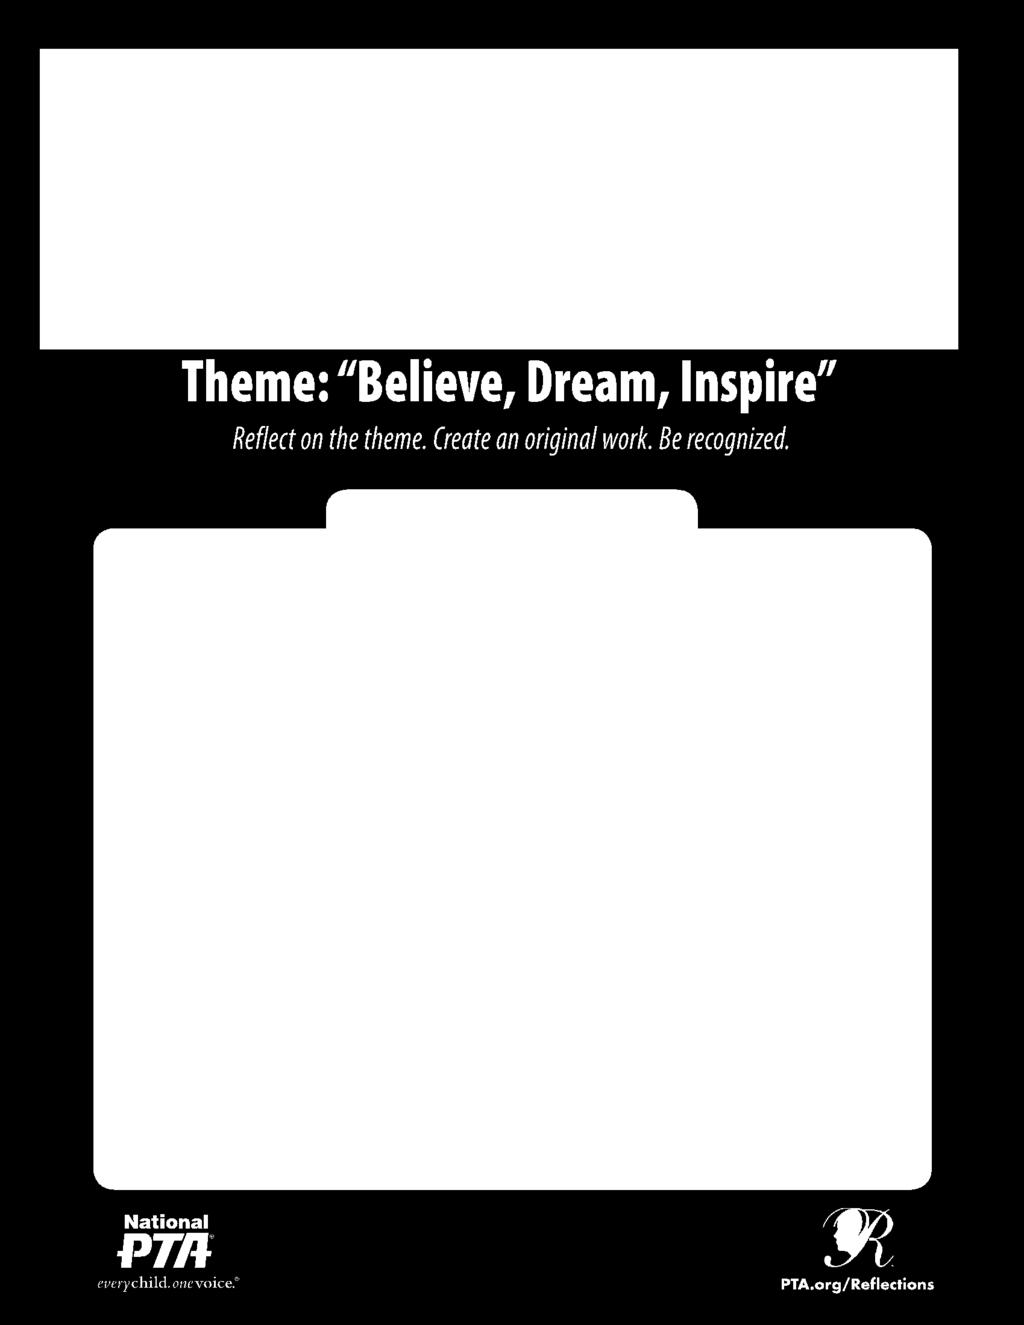 The Reflections theme for 2013 2014 is Believe, Dream, Inspire.